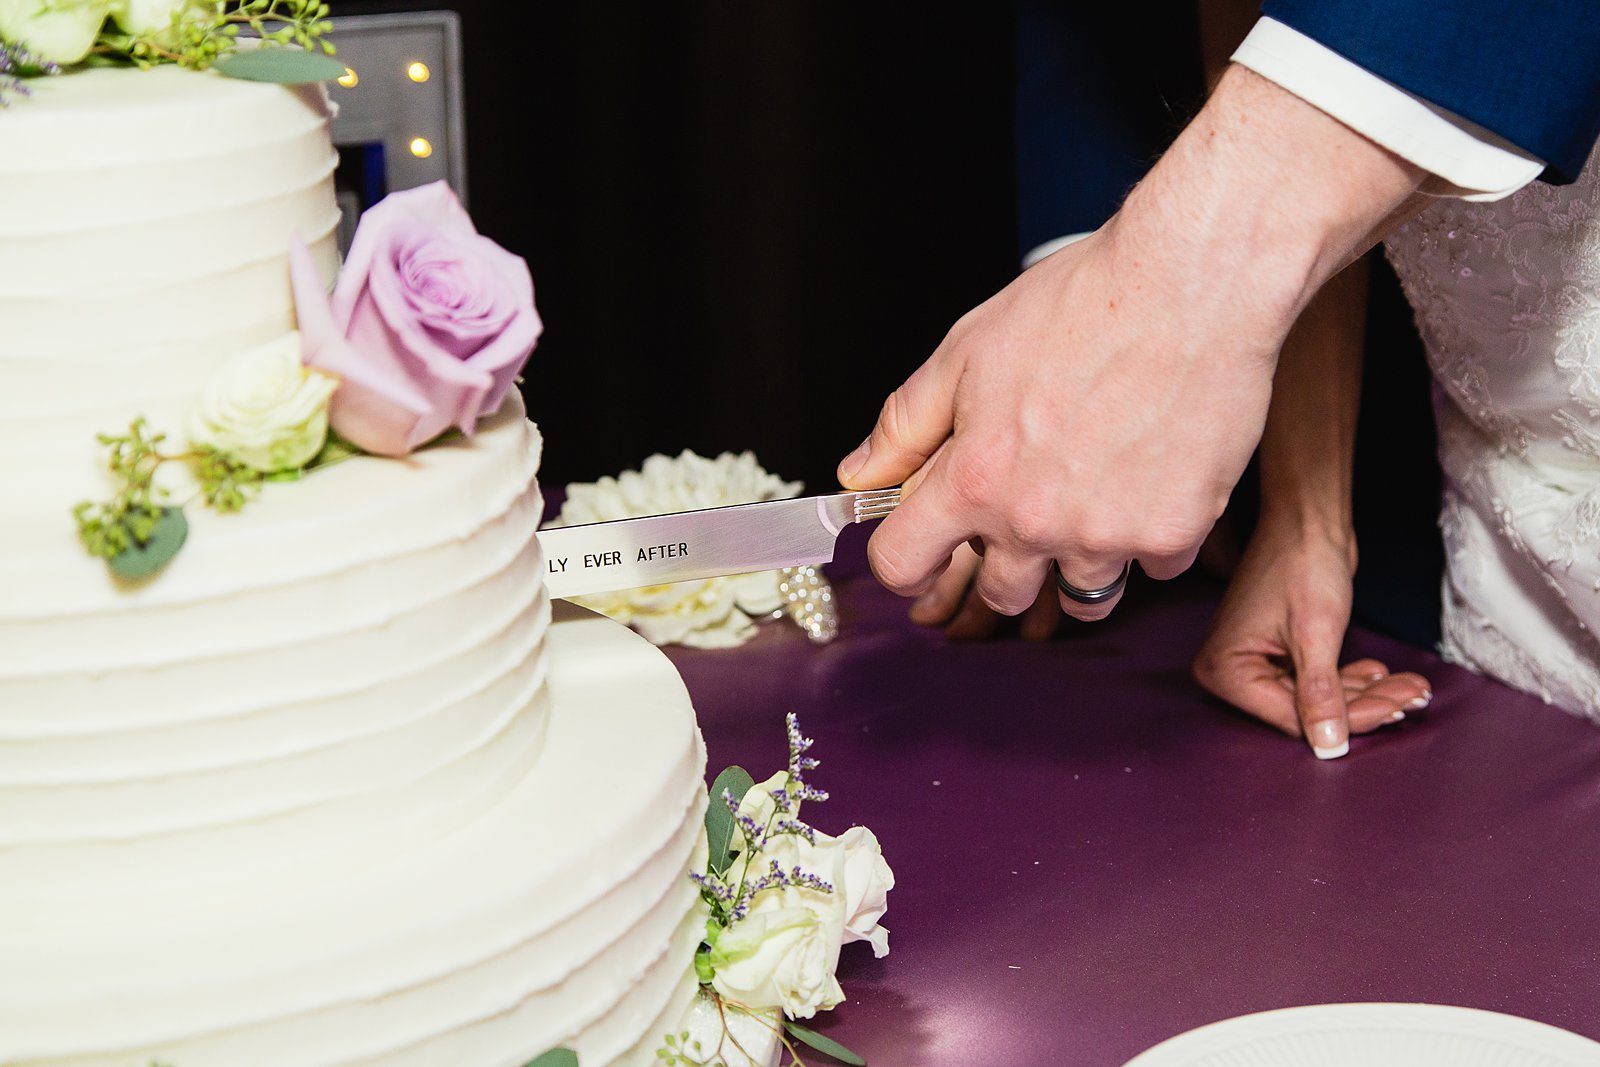 Bride and Groom cutting their wedding cake at their Superstition Manor wedding reception by Arizona wedding photographer PMA Photography.